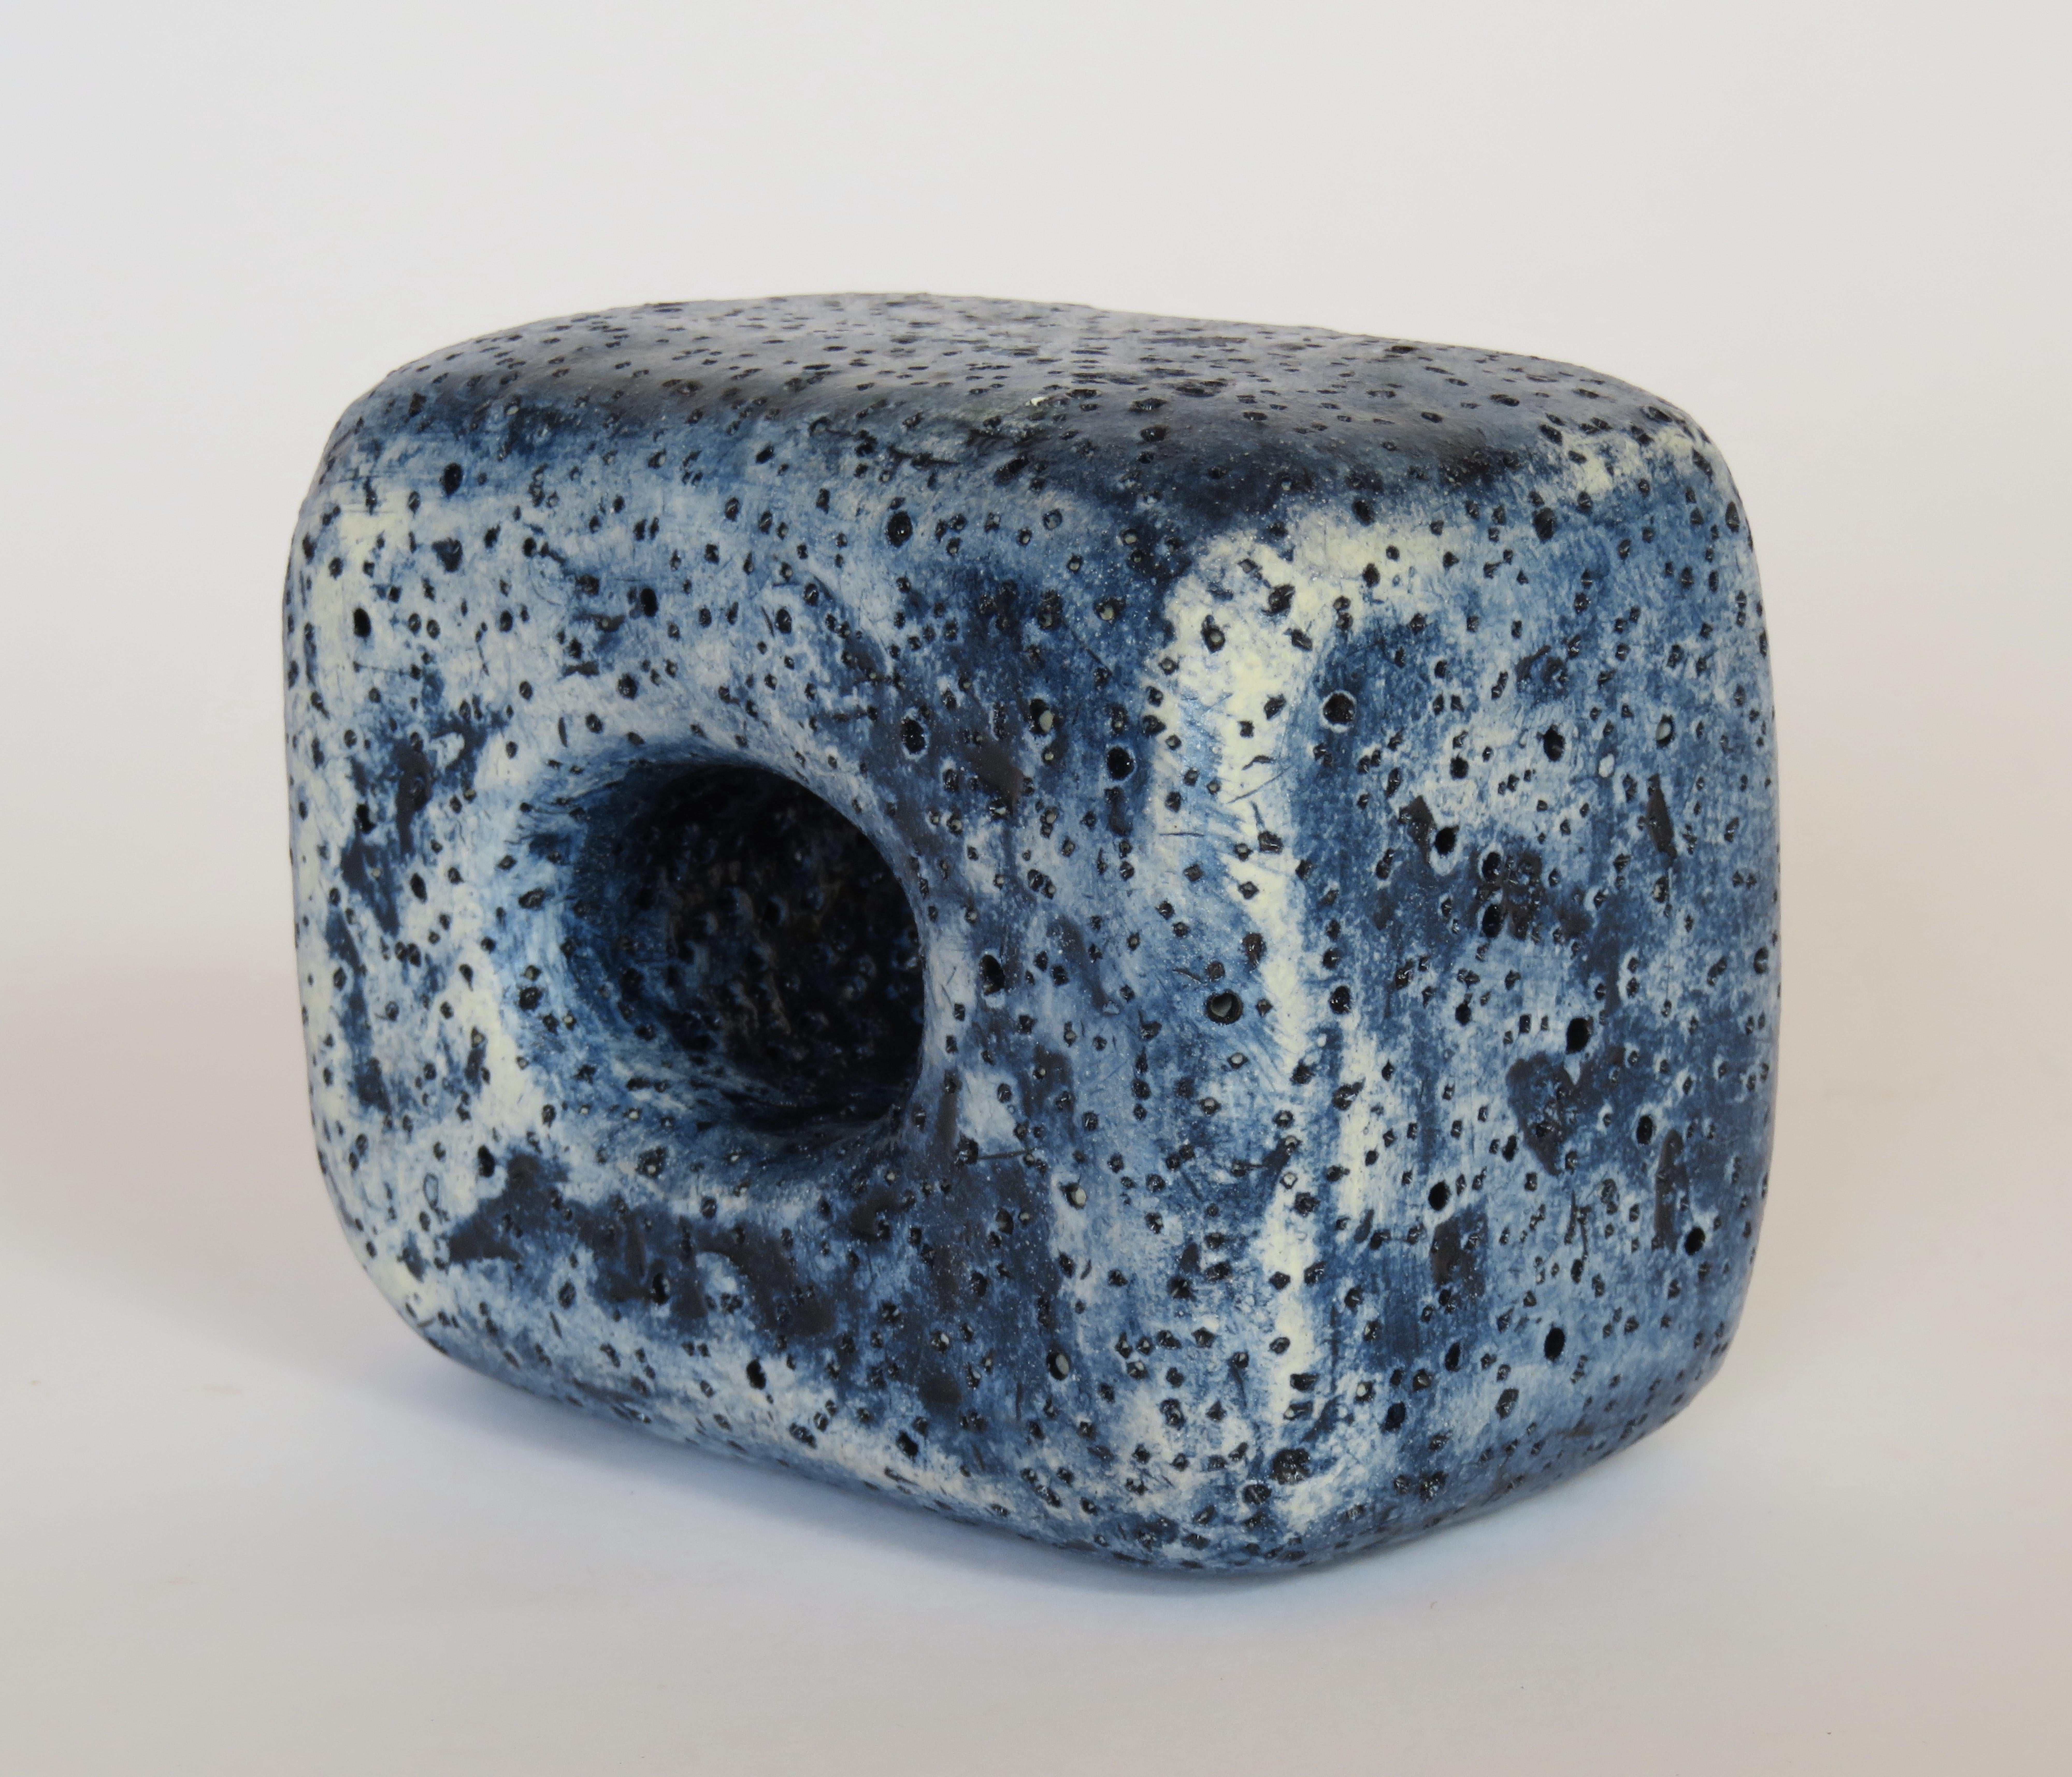 Glazed Hand Textured Ceramic Sculpture, Oblong Cube with Oval Opening in Deep Blue Wash